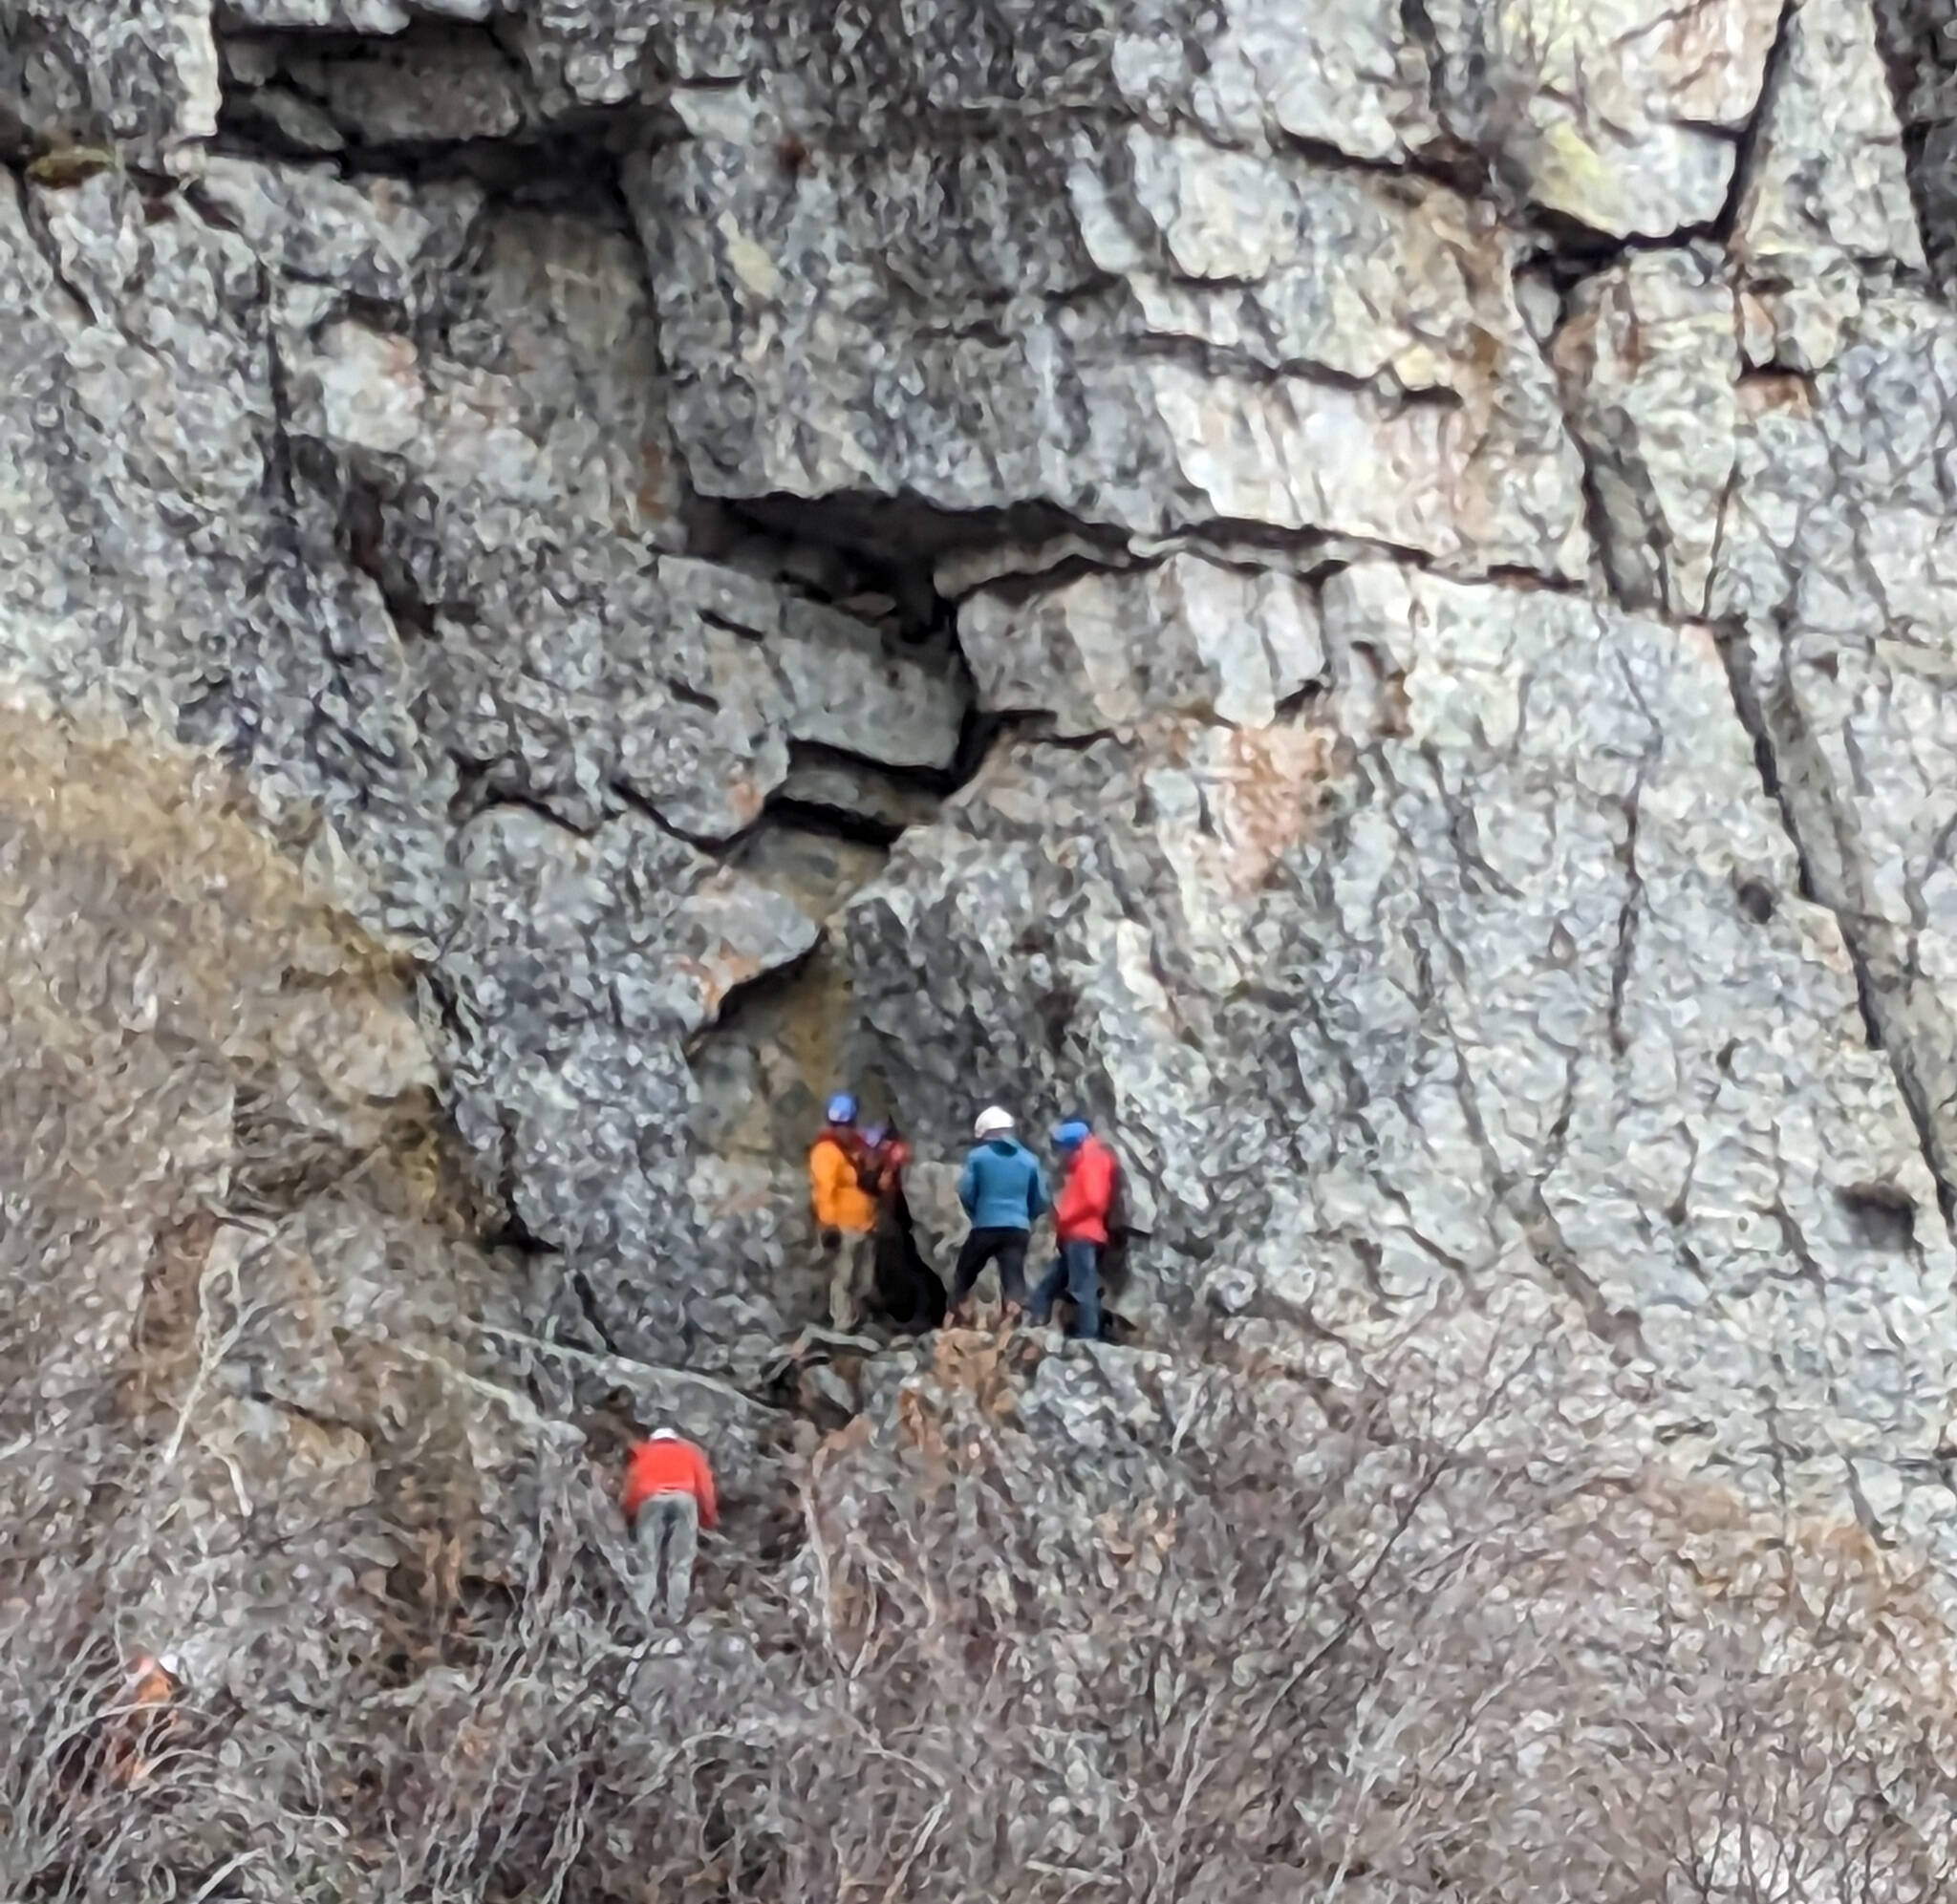 Around 15 Penticton and Area Search and Rescue and several climbers spent their Easter Sunday rescuing a climber who had broke his leg at Skaha Bluffs. (PENSAR)